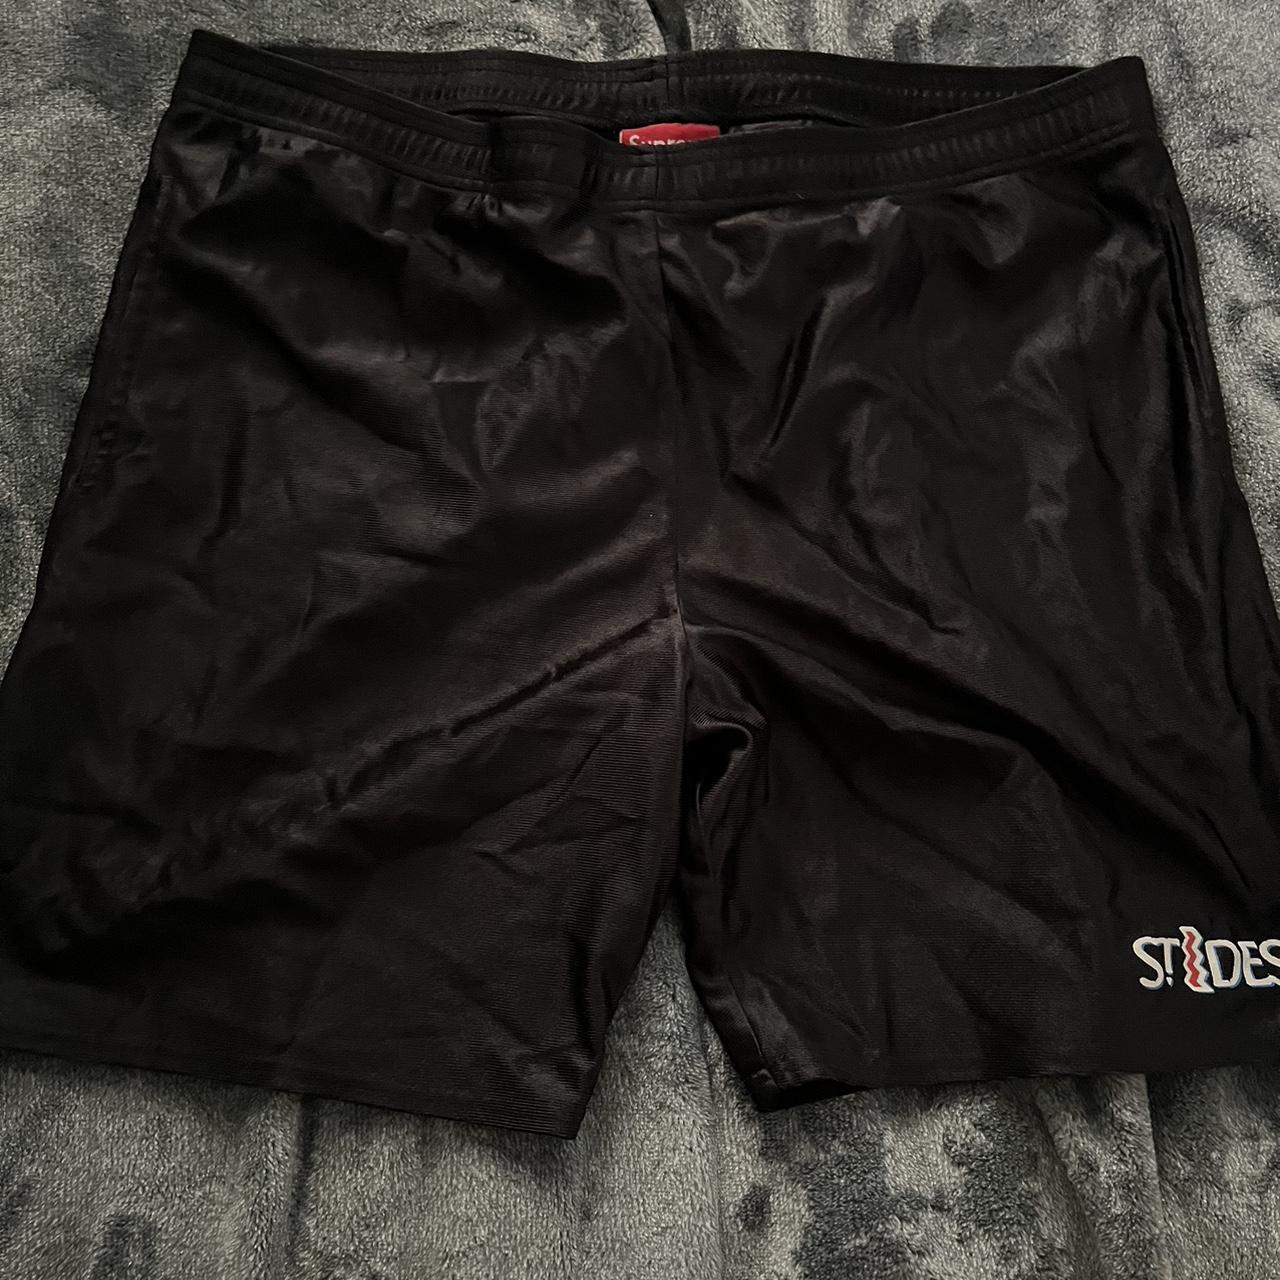 Supreme/Ronin Mesh Shorts A beautiful black and red - Depop